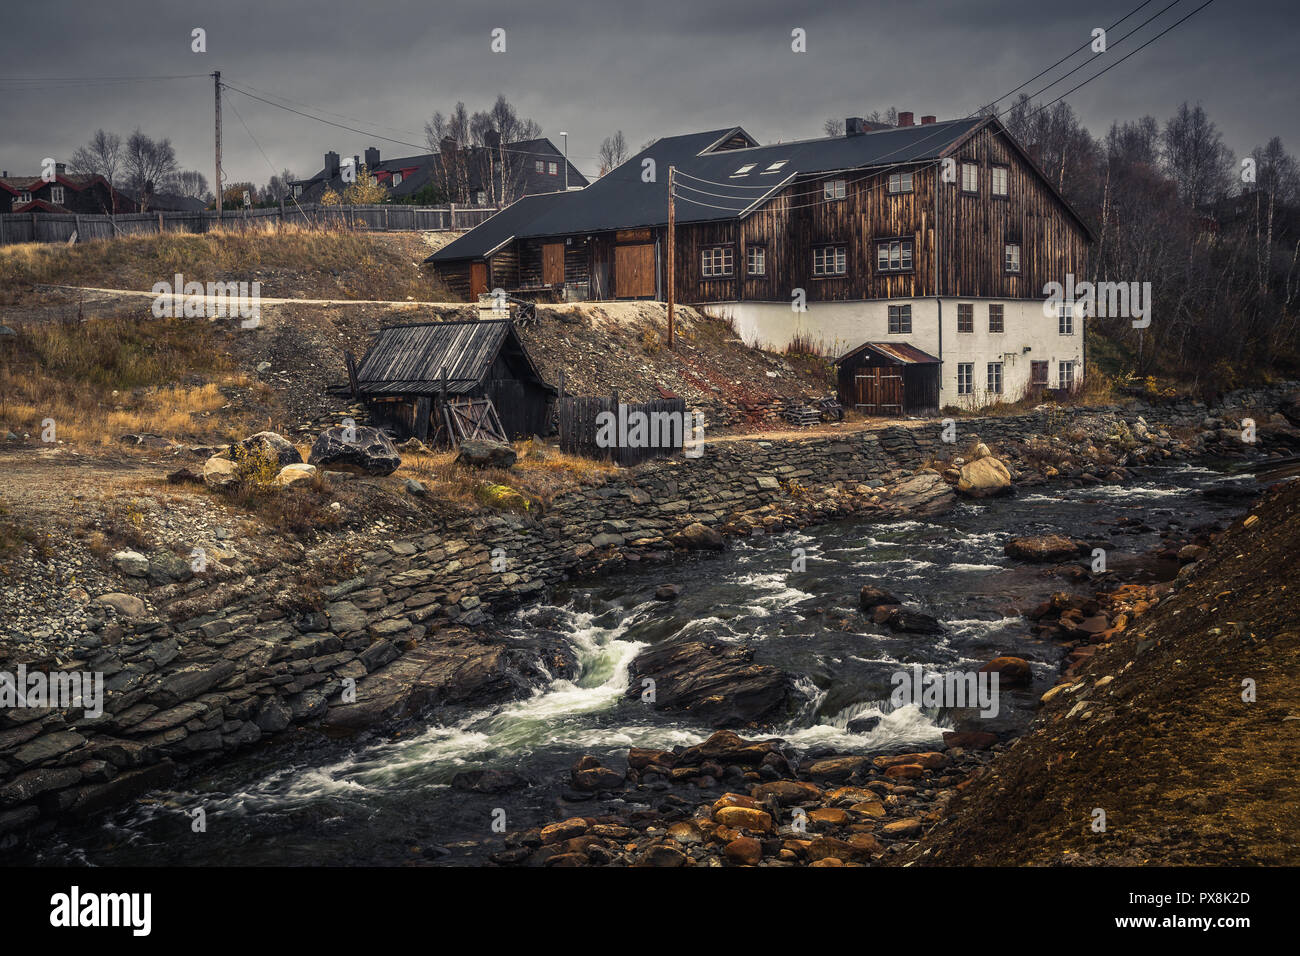 Mining town Røros in Norway, fantastic original old norwegian town, set as a UNESCO World Heritage Site. Traditional wooden architecture. Stock Photo